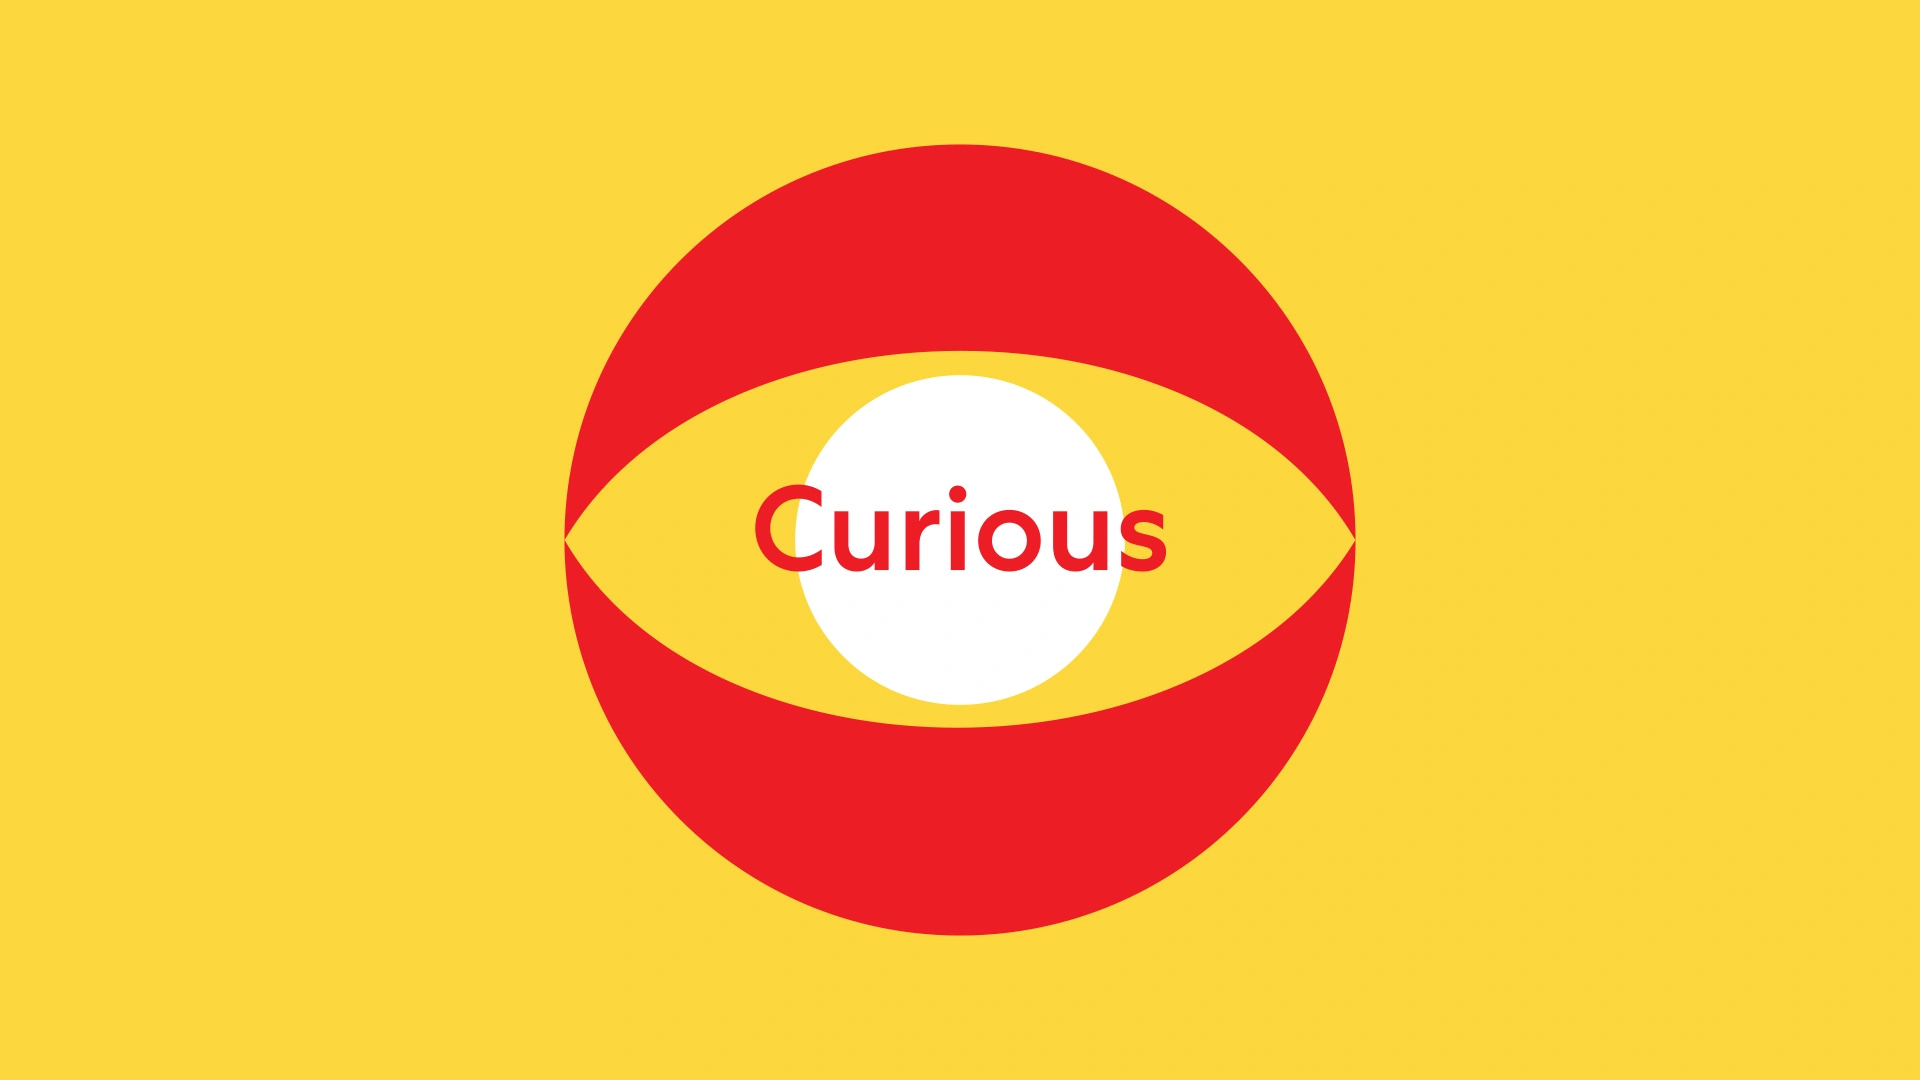 Image taken from the Zippy motion film, a visual composition with an abstract eye in the center and the word "Curious".